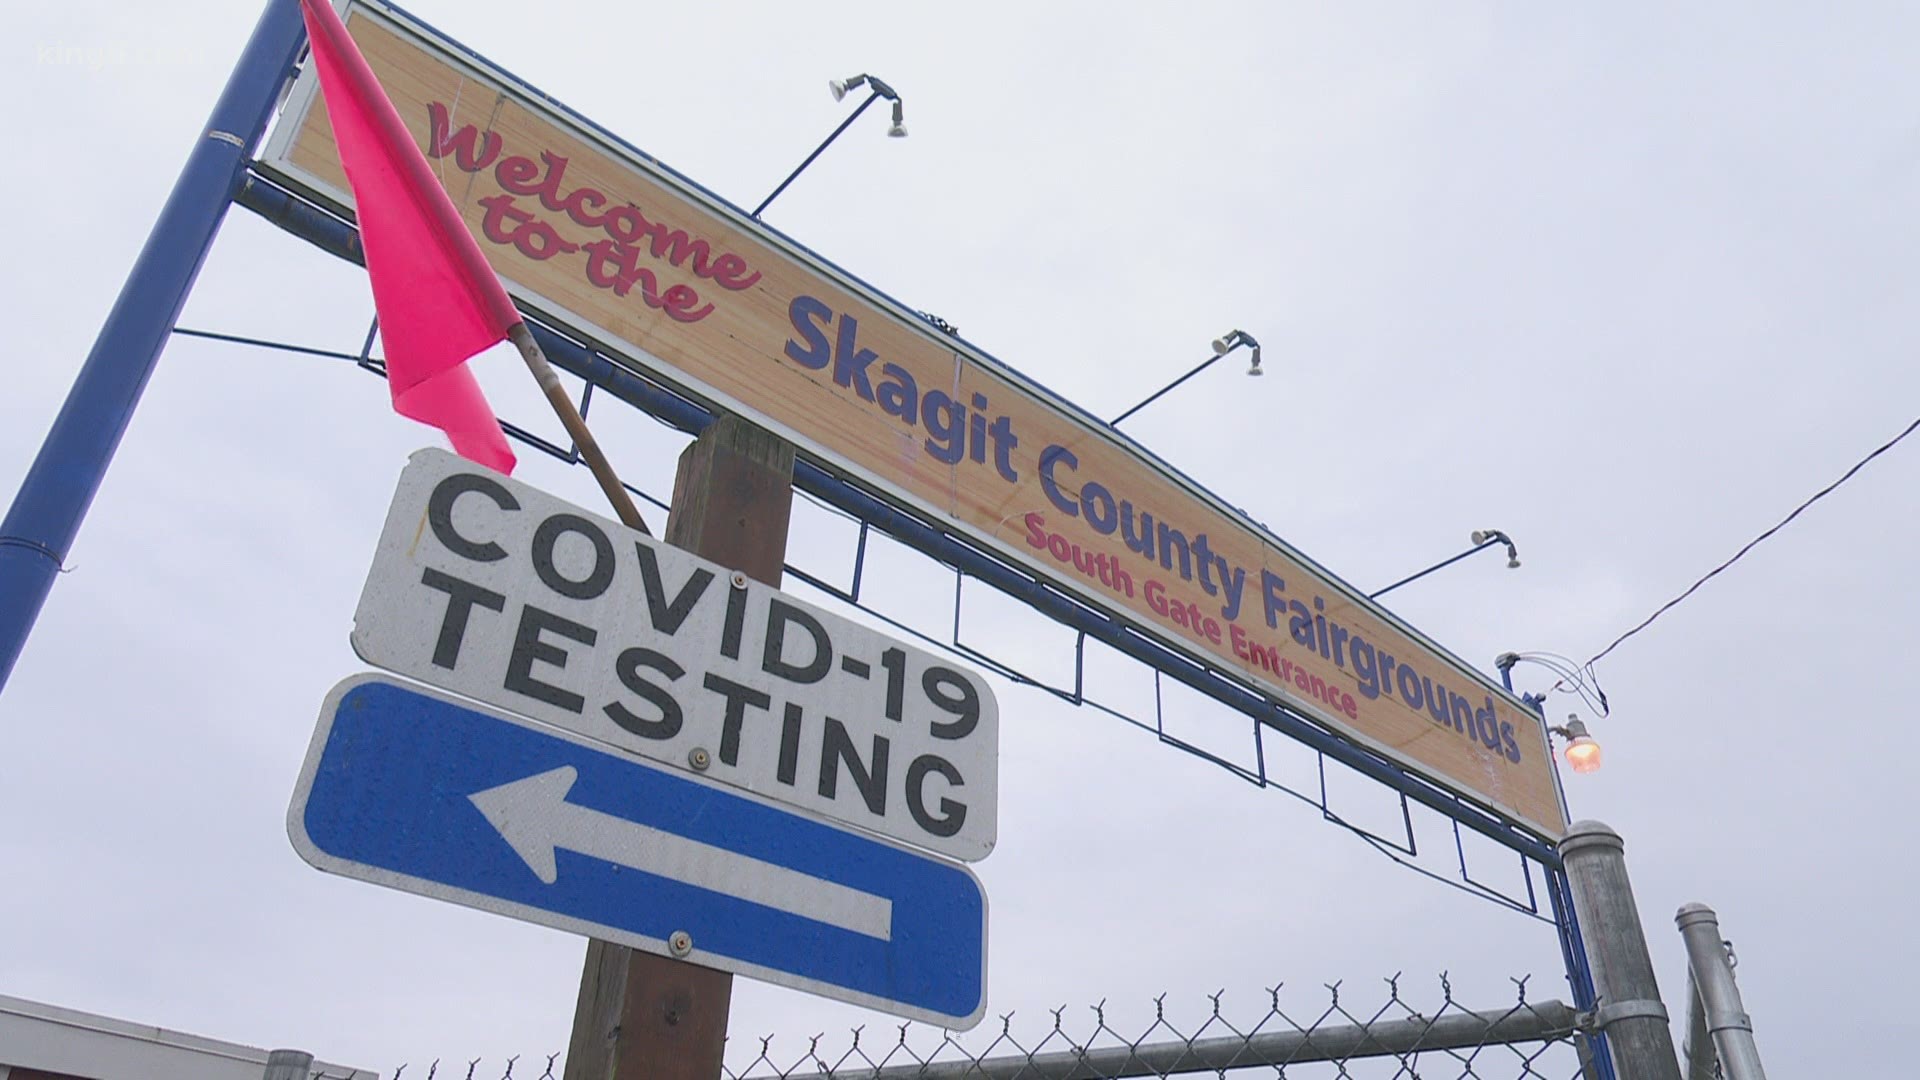 Funding for test sites is dire, and officials are asking those without symptoms who may have been exposed to not get county COVID tests.